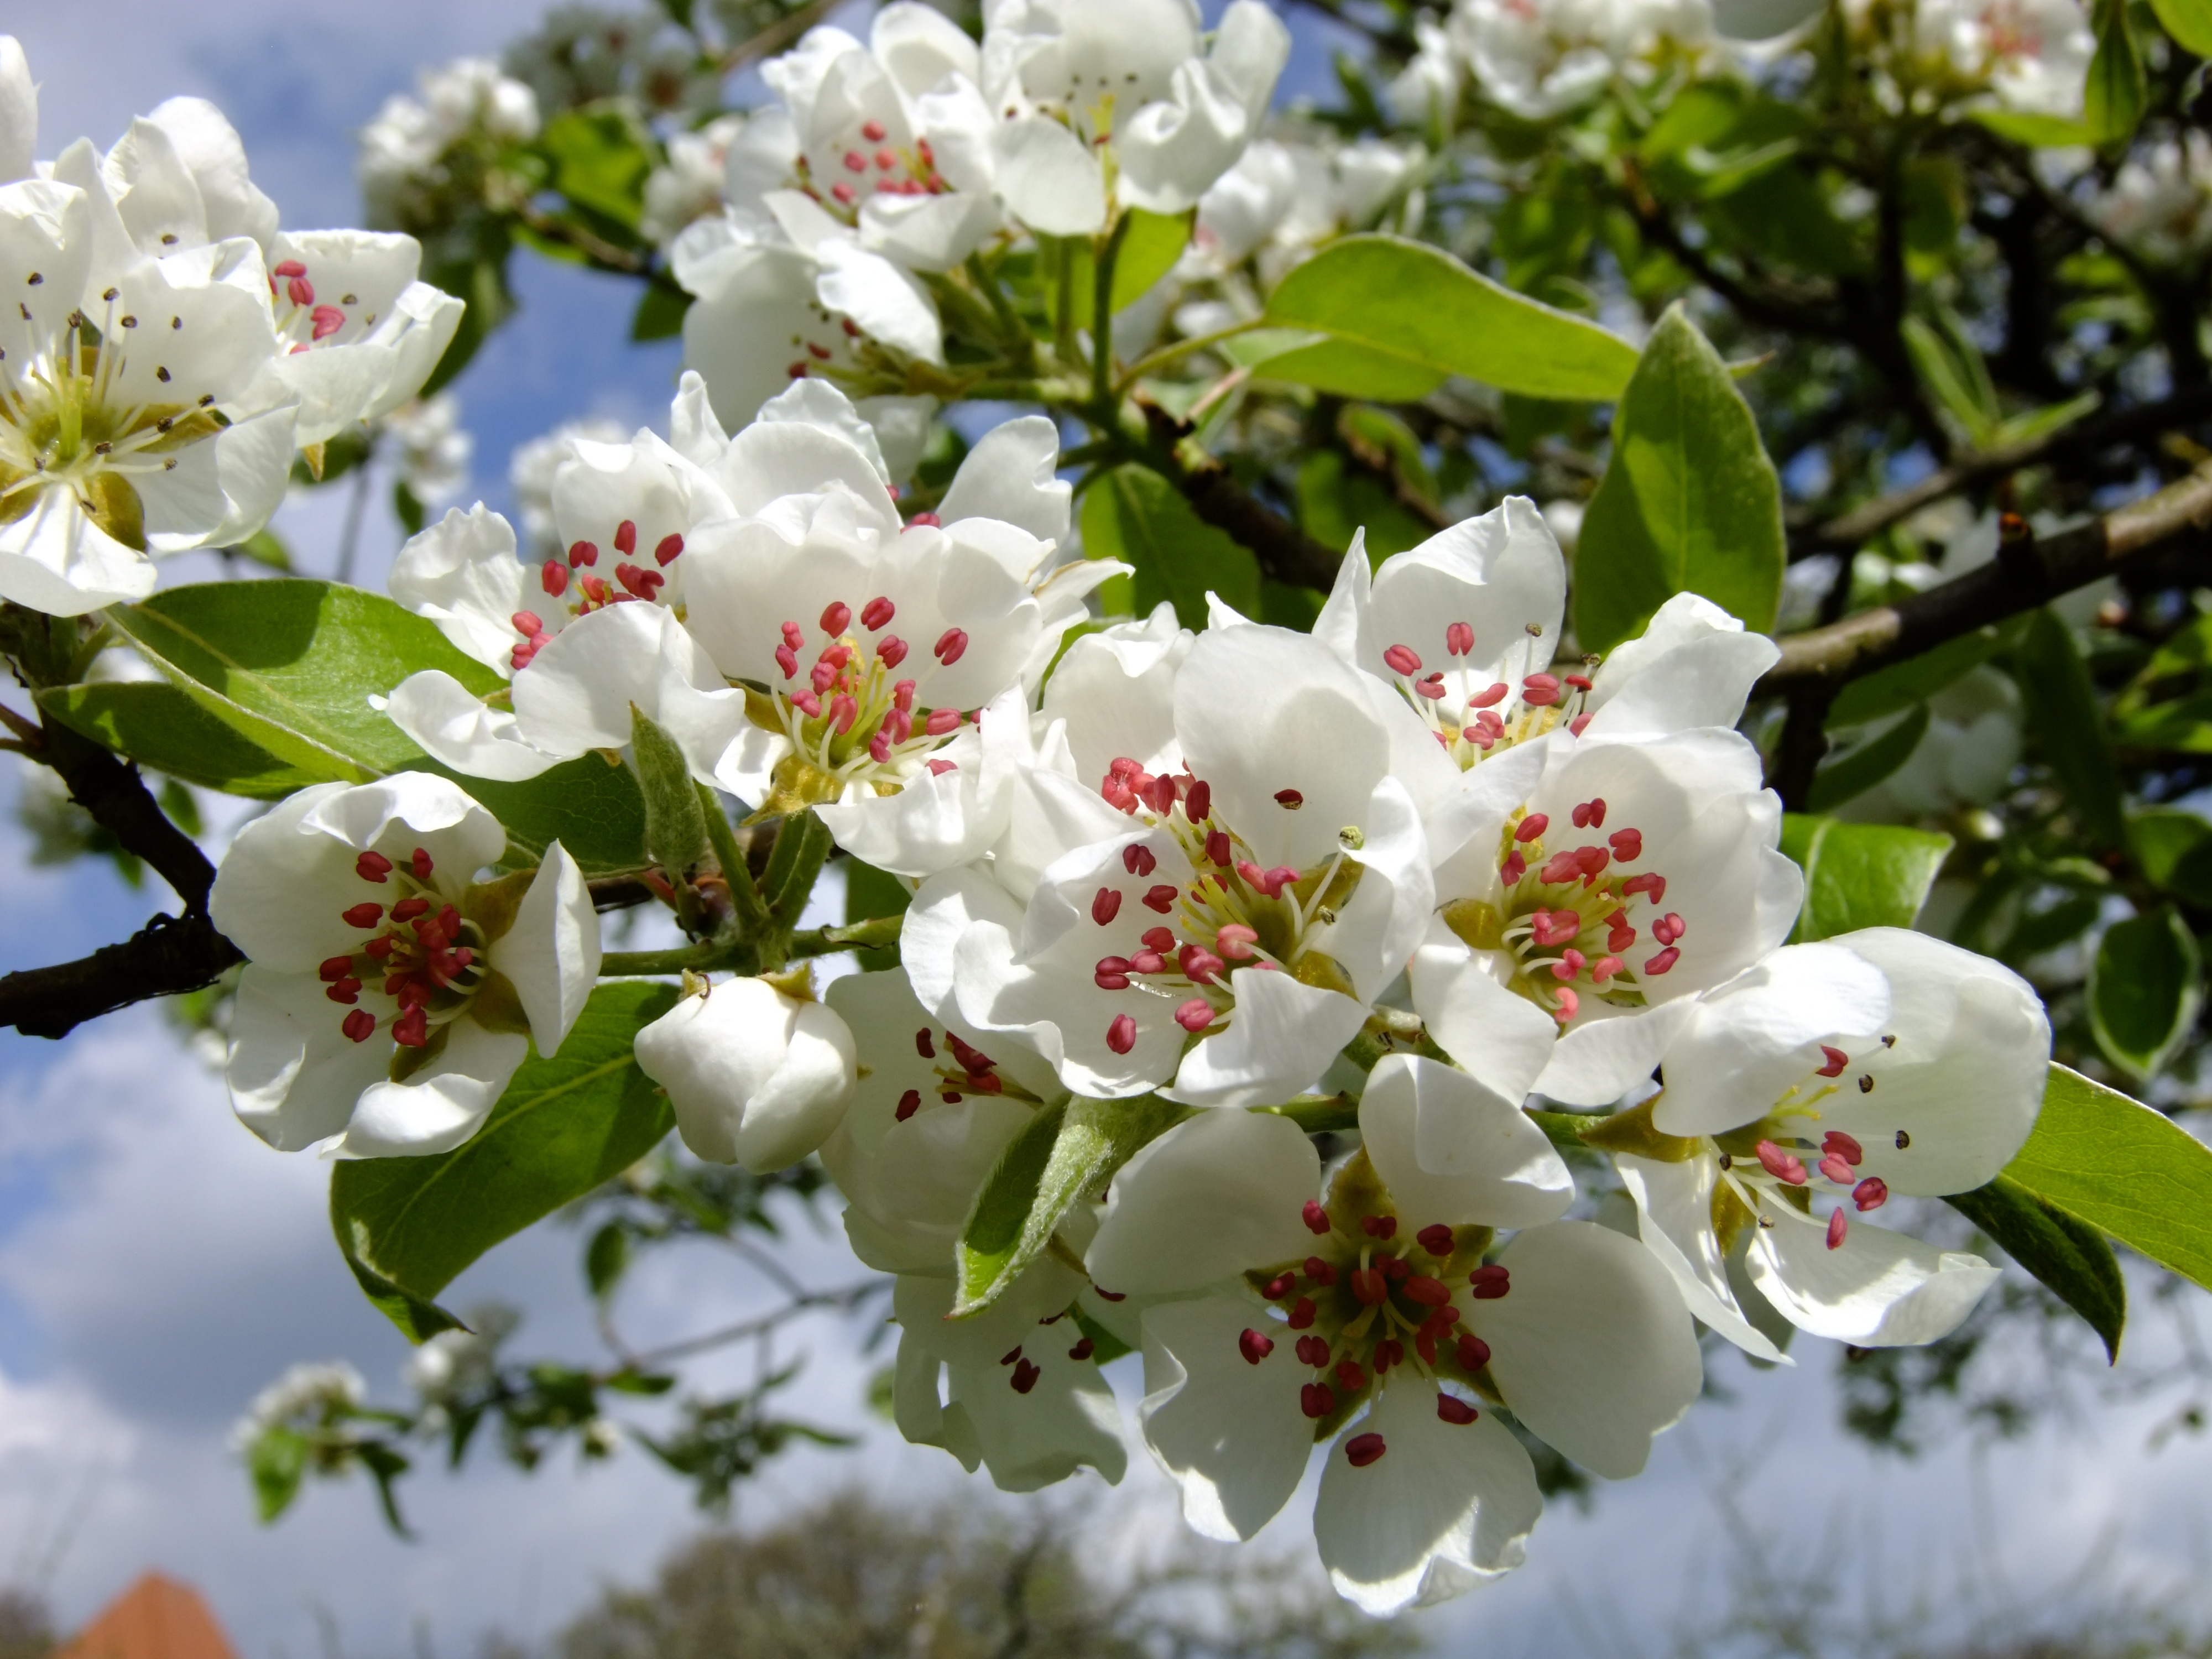 Big white flowers on a tree